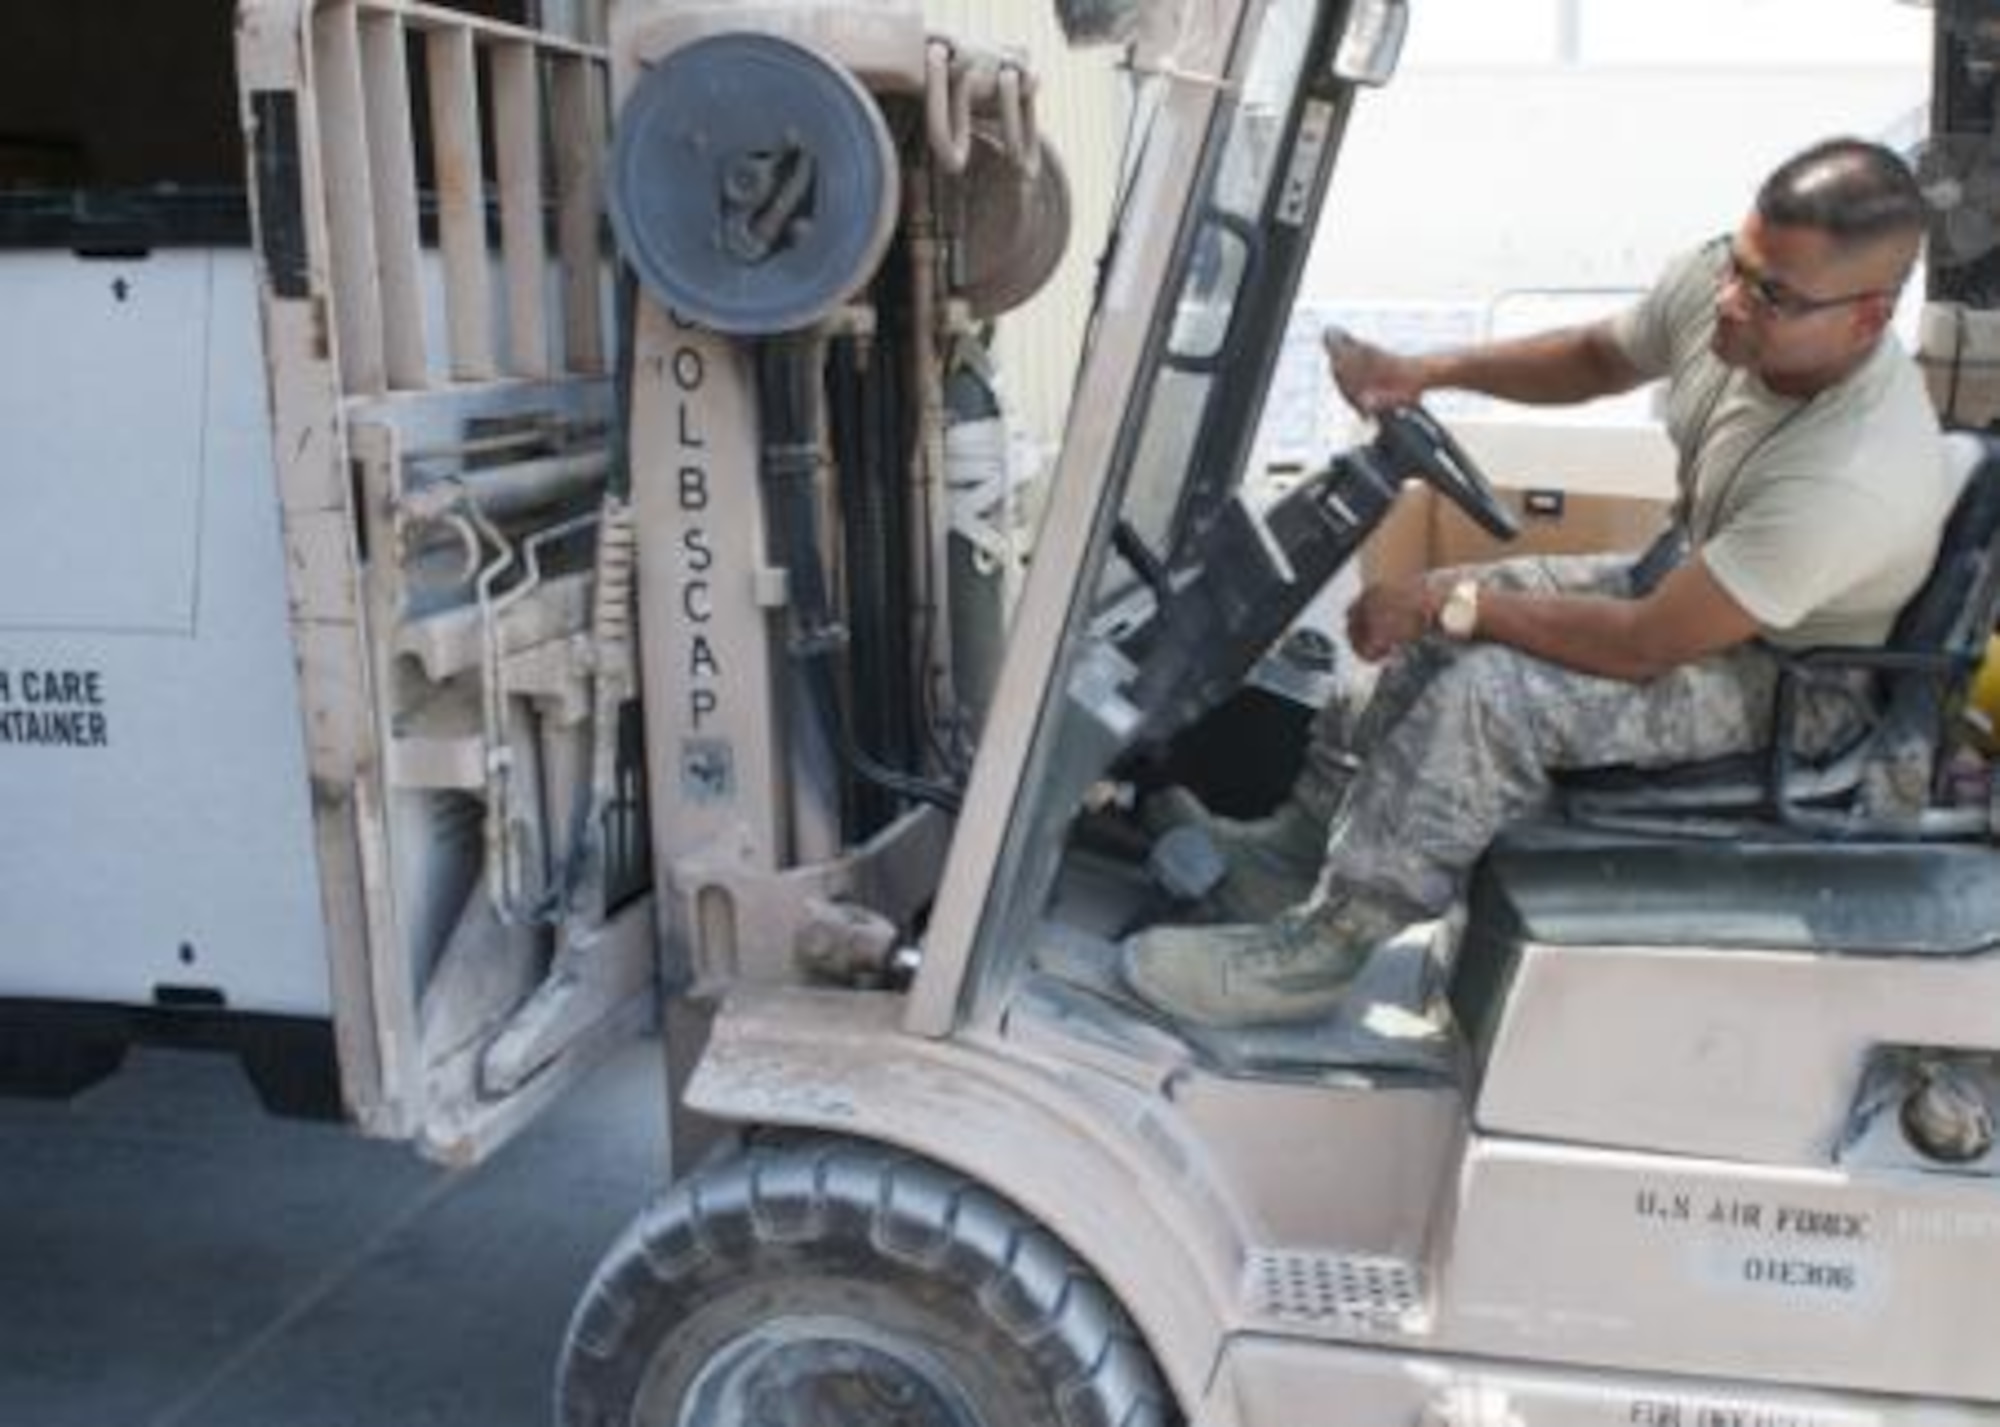 Tech. Sgt. Gautambhai Patel operates a forklift to help ready humanitarian aid pallets at a location in Southwest Asia Aug., 11, 2014. The pallets consist of food and water for humanitarian aid drops to assist displaced citizens in the vicinity of Sinjar, Iraq. (U.S. Air Force photo by Senior Airman Colin Cates)